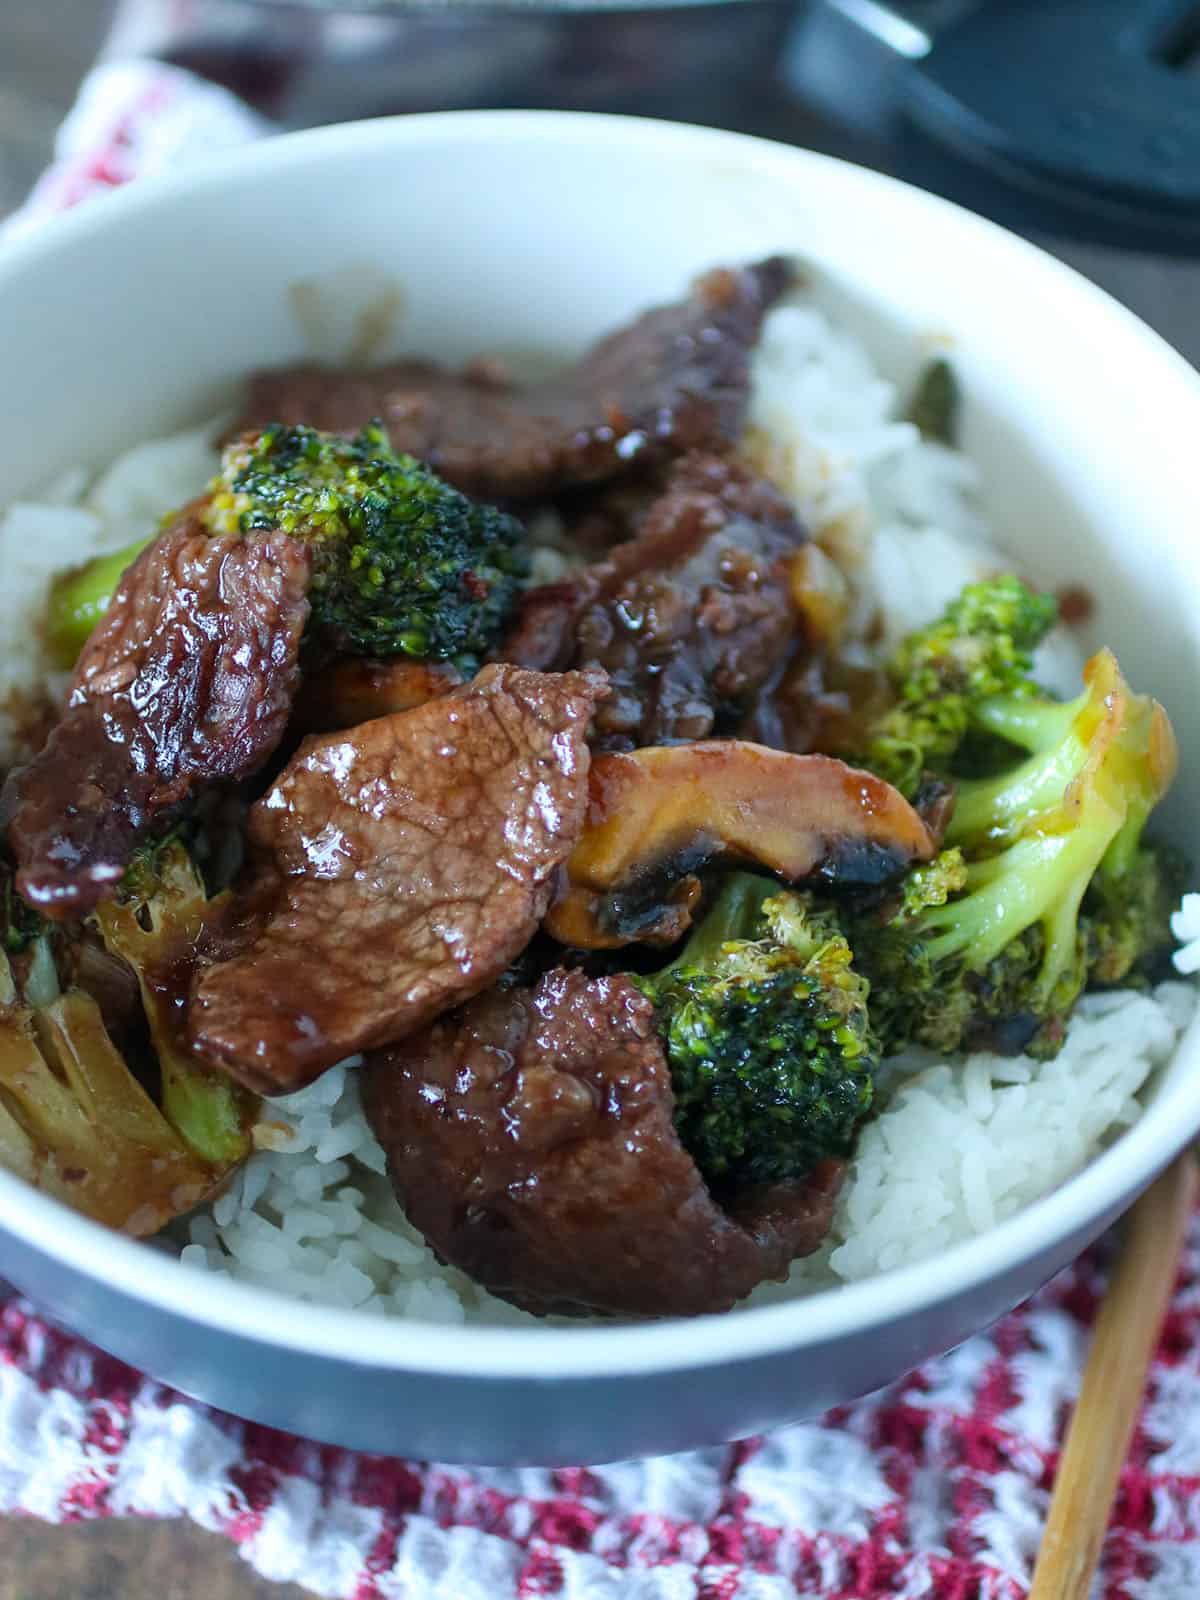 Beef teriyaki with mushrooms and broccoli in a bowl with rice.